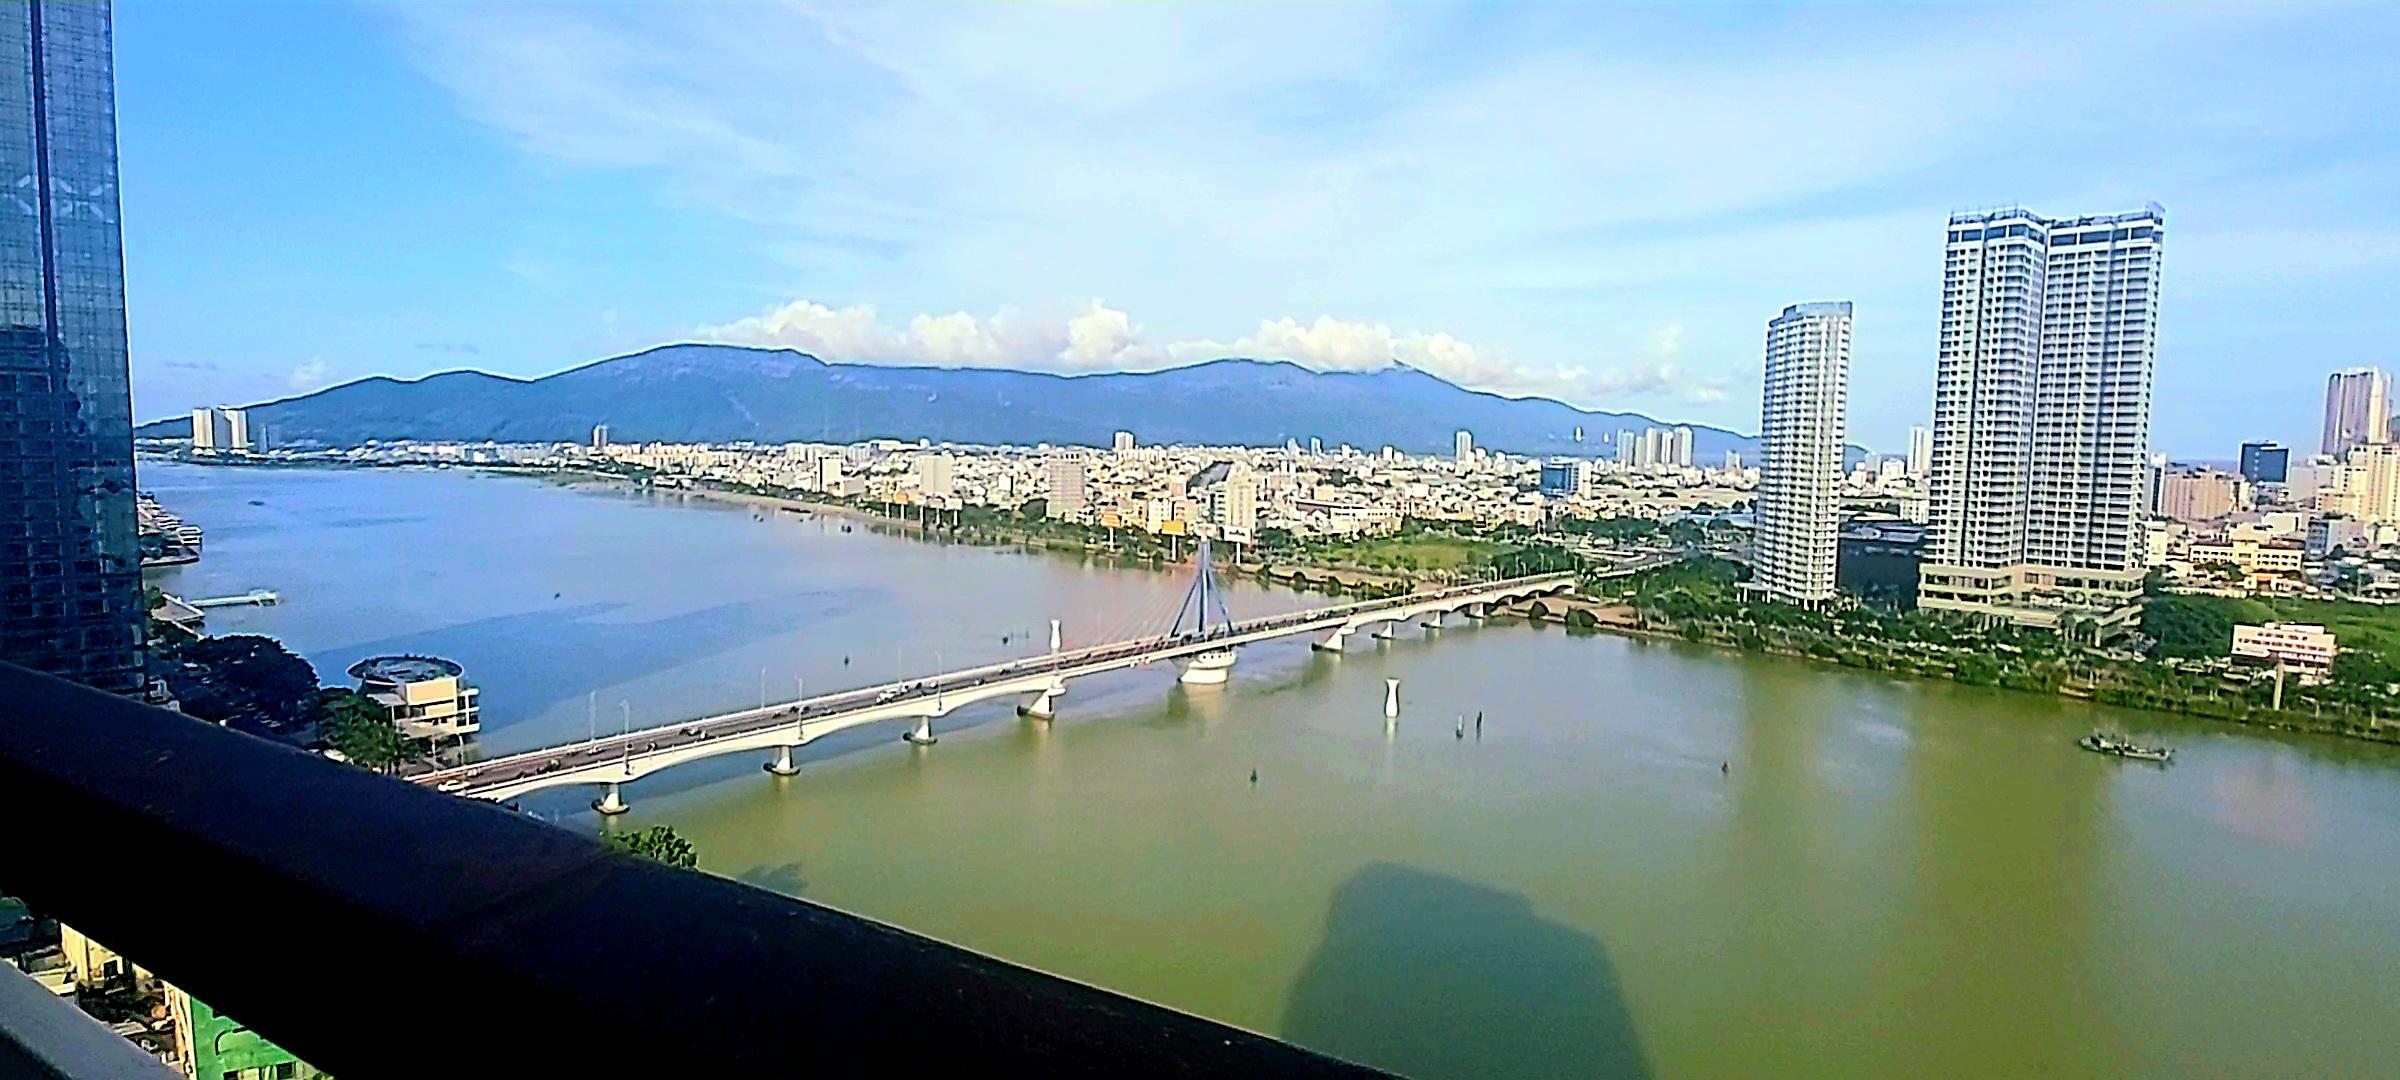 Indochina.2 bedroom apartment for rent, 118m2, direct view of Han river